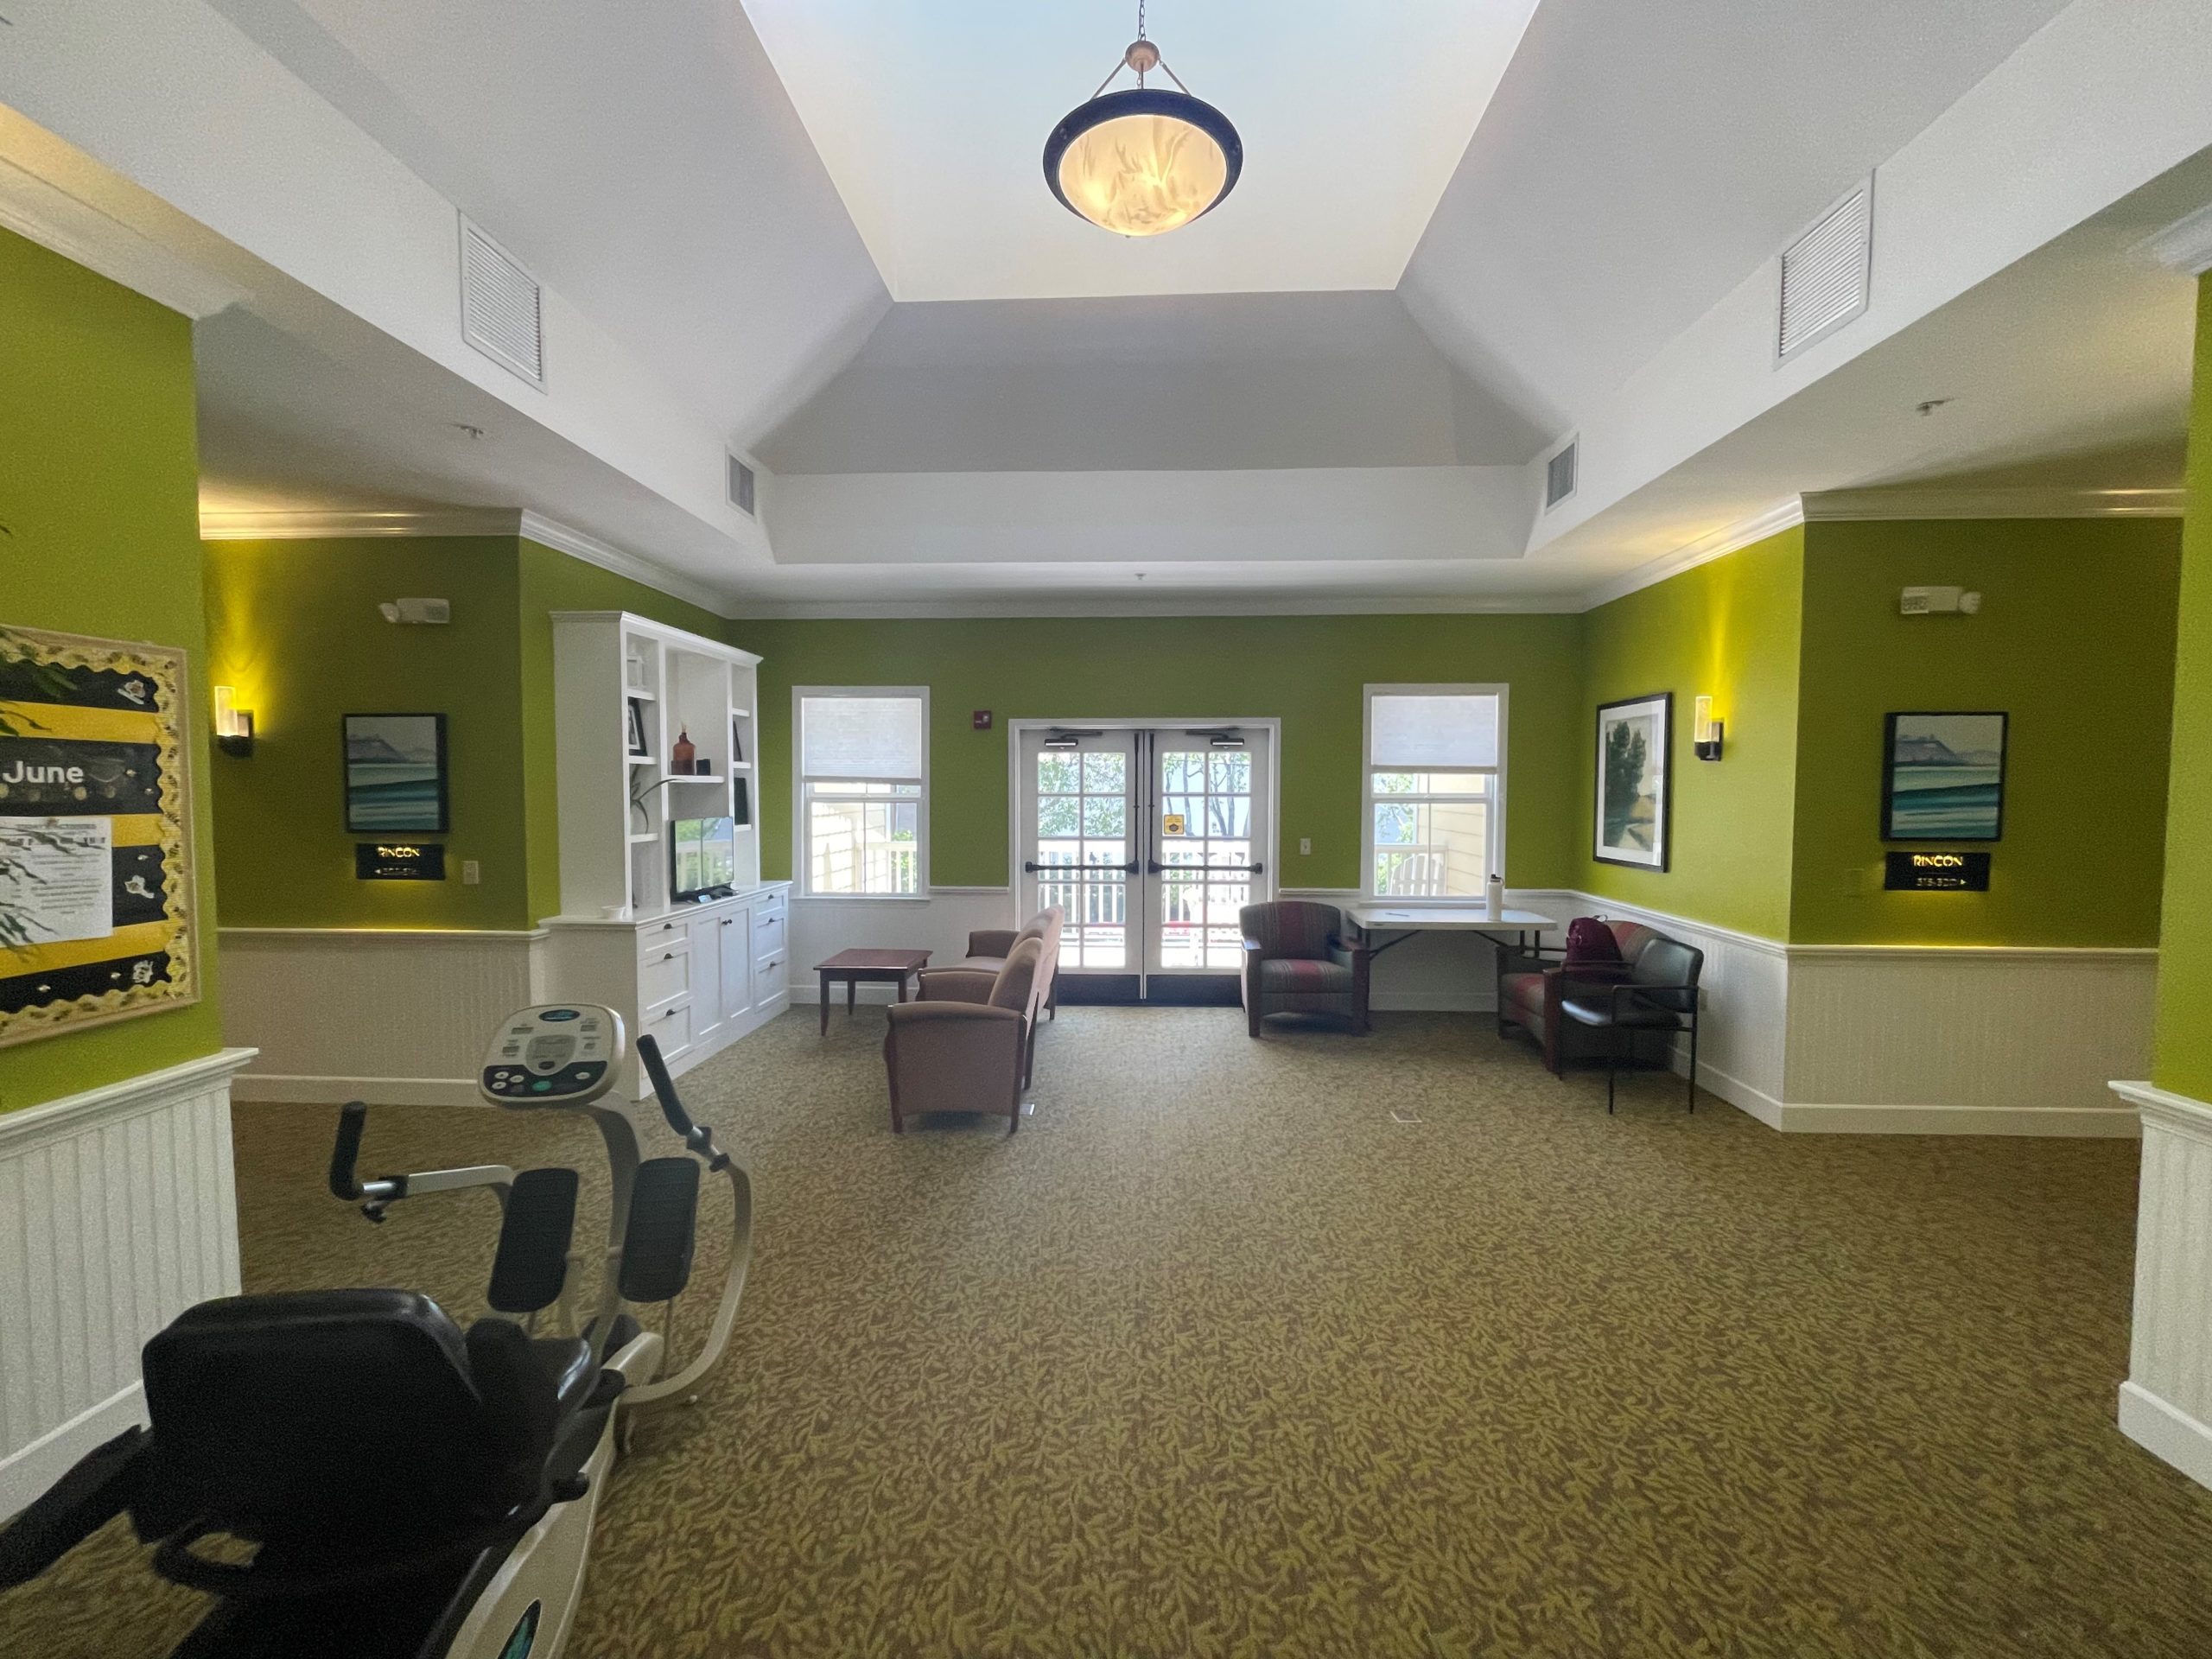 HERITAGE HOUSE-AN ASSISTED LIVING COMMUNITY